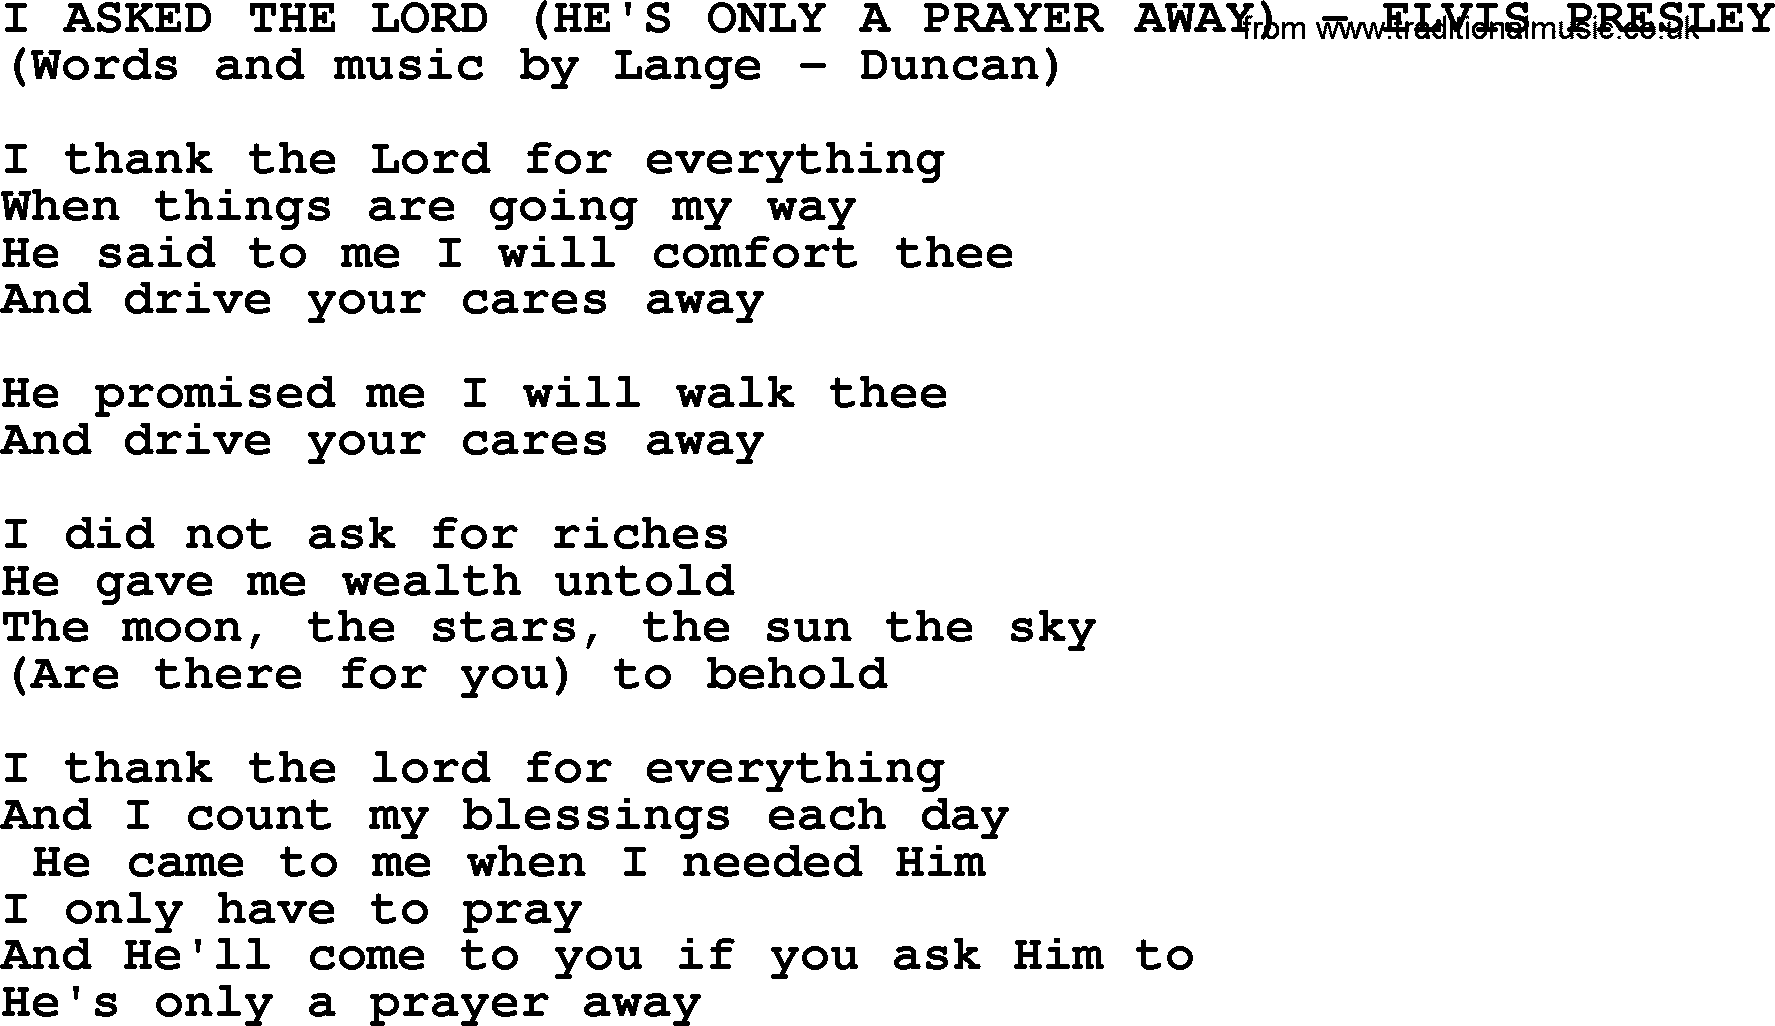 Elvis Presley song: I Asked The Lord (He's Only A Prayer Away) lyrics